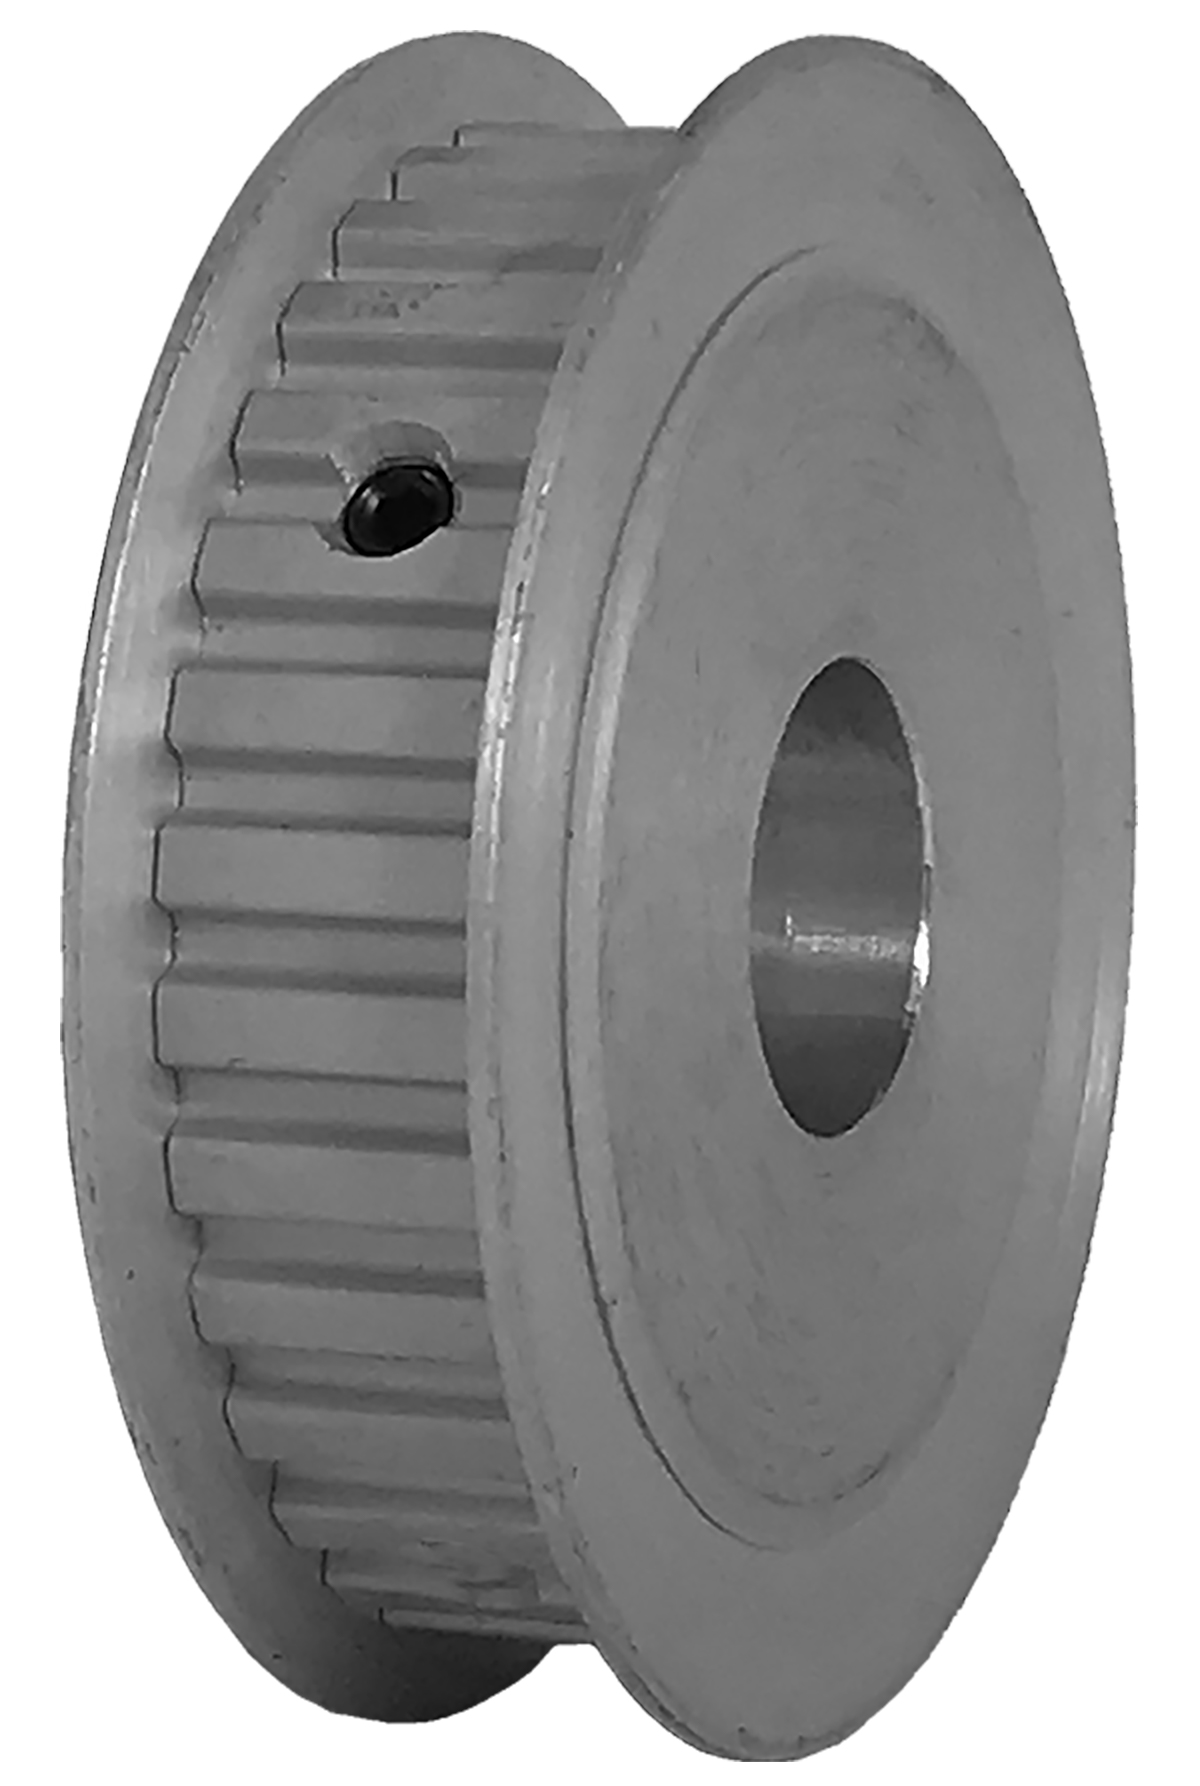 32XL037-3FA7 - Aluminum Imperial Pitch Pulleys